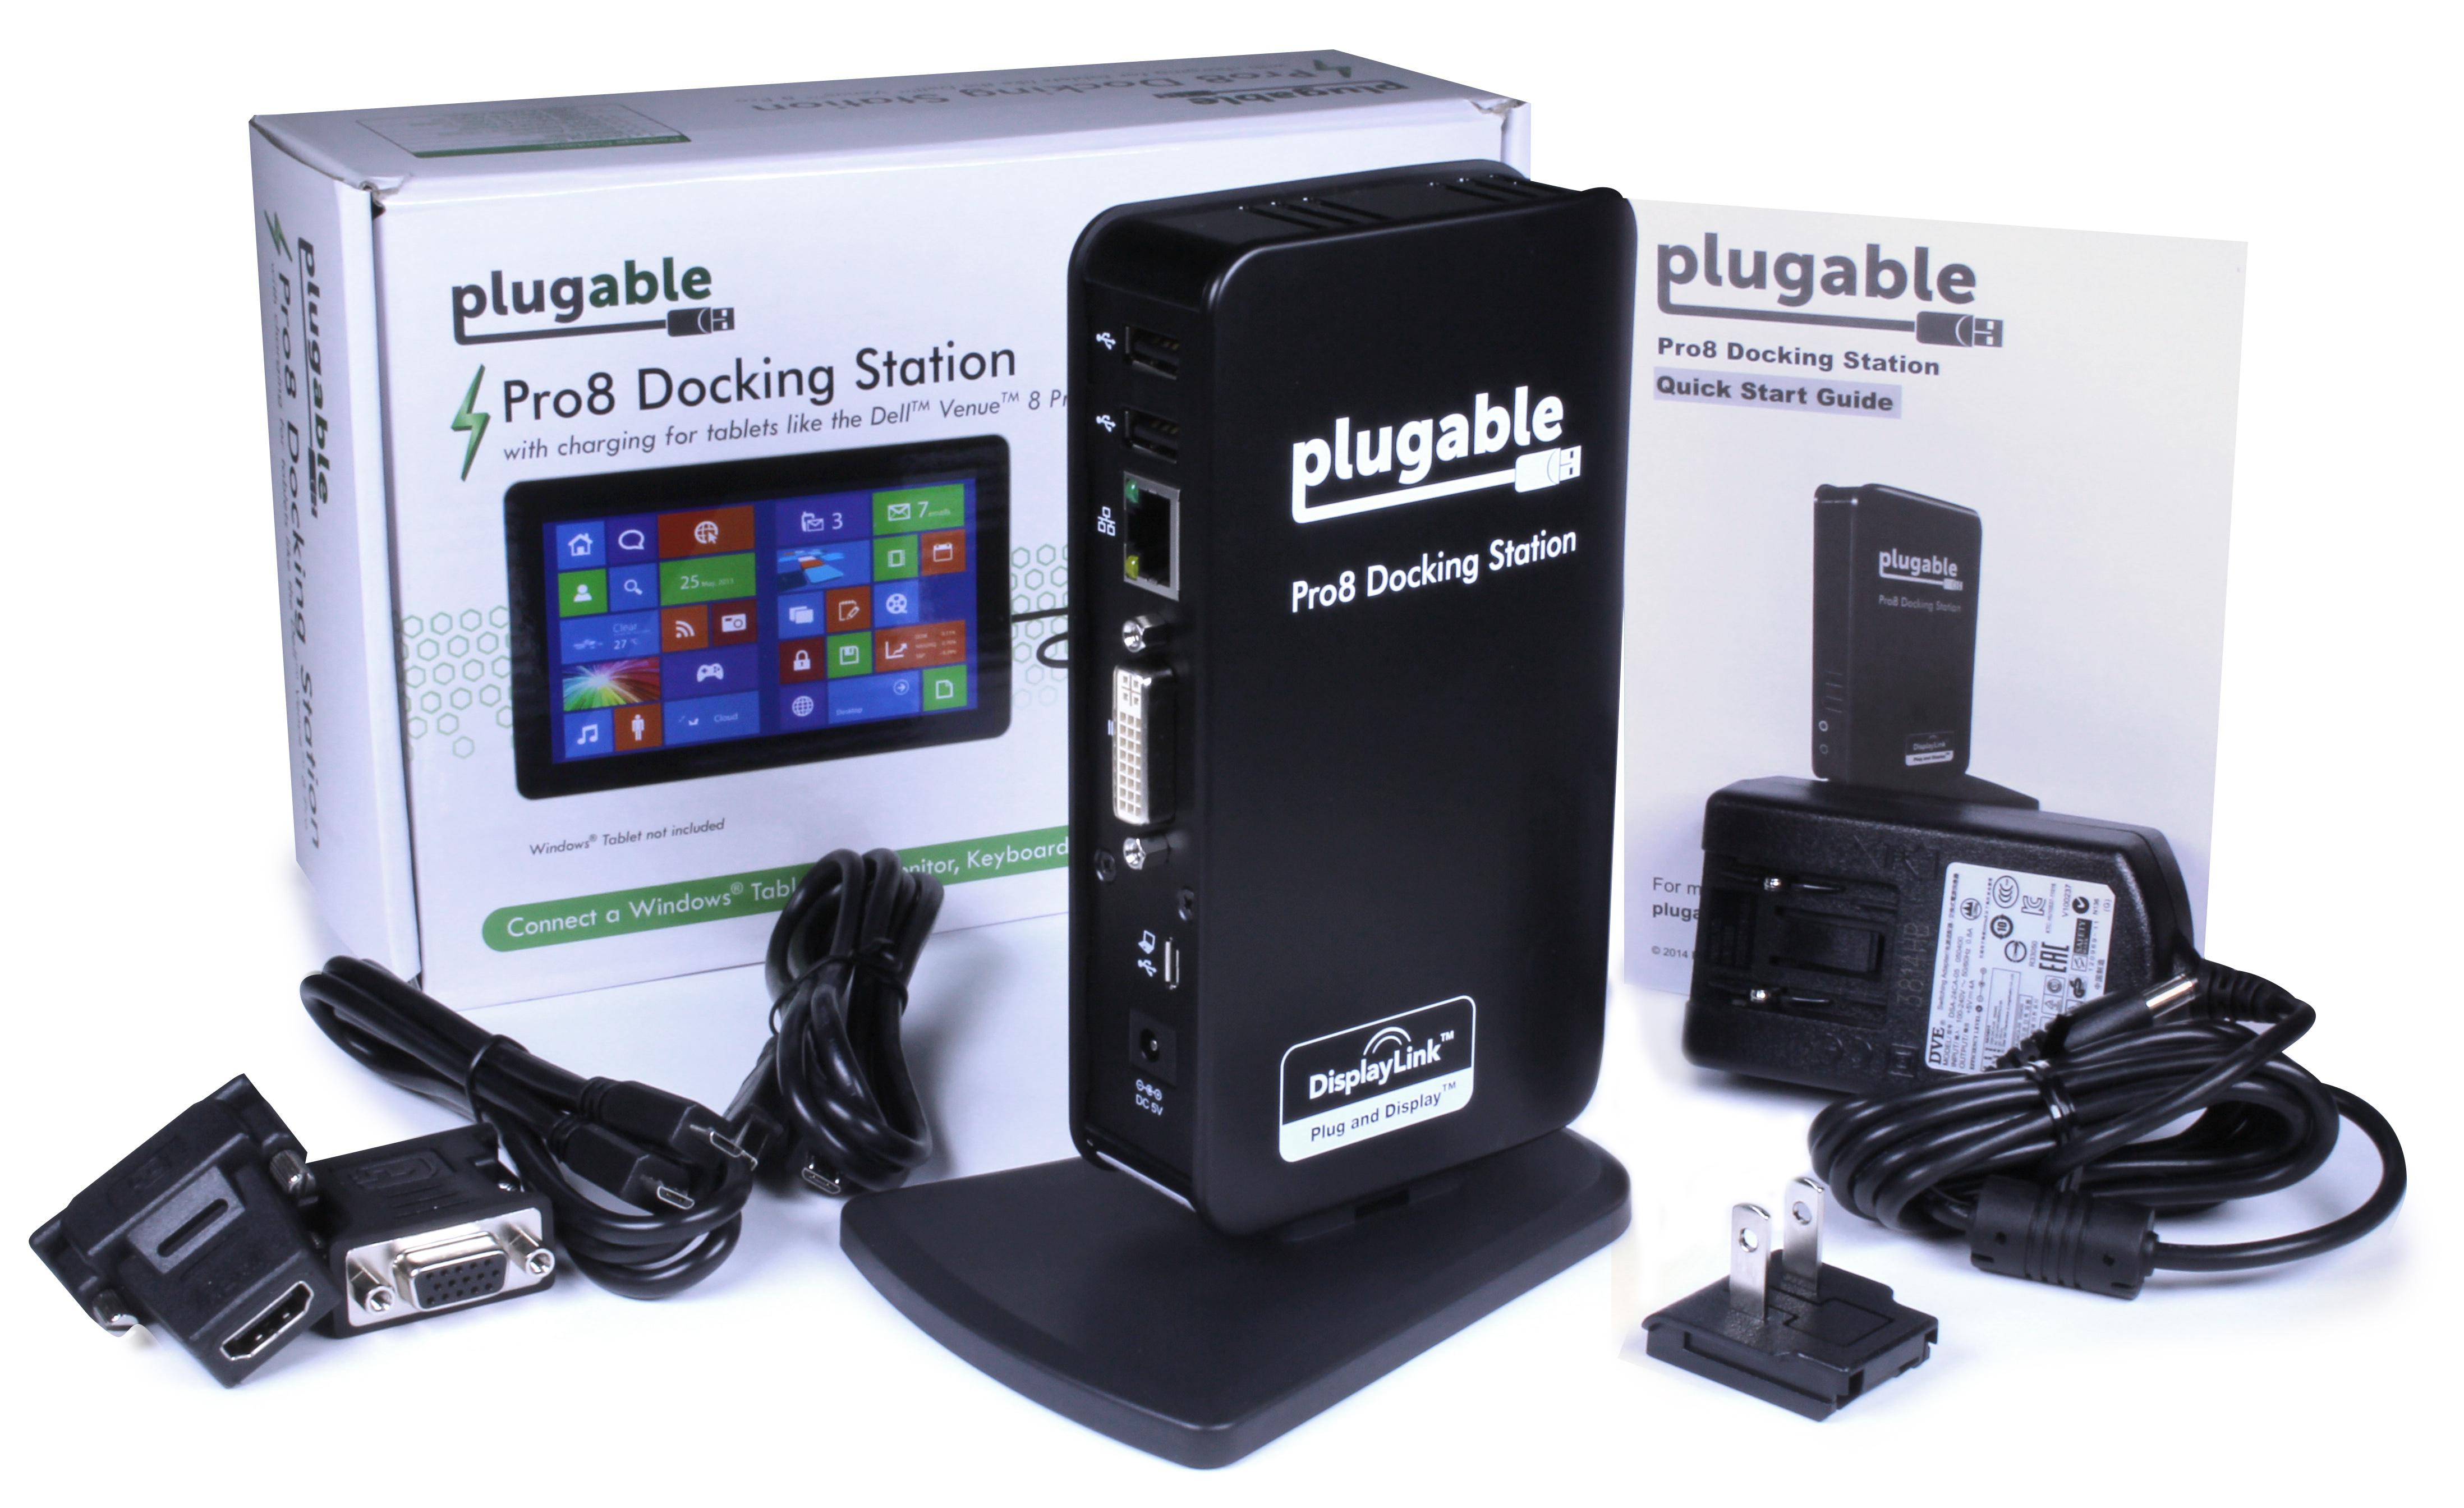 Plugable Pro8 Charging & USB Docking Station for Select Windows Tablets - Simultaneously Charges & Adds Extended Display Output, 3.5mm Audio In/Out, 10/100 Ethernet, and 4 2.0 USB Ports. - image 2 of 7